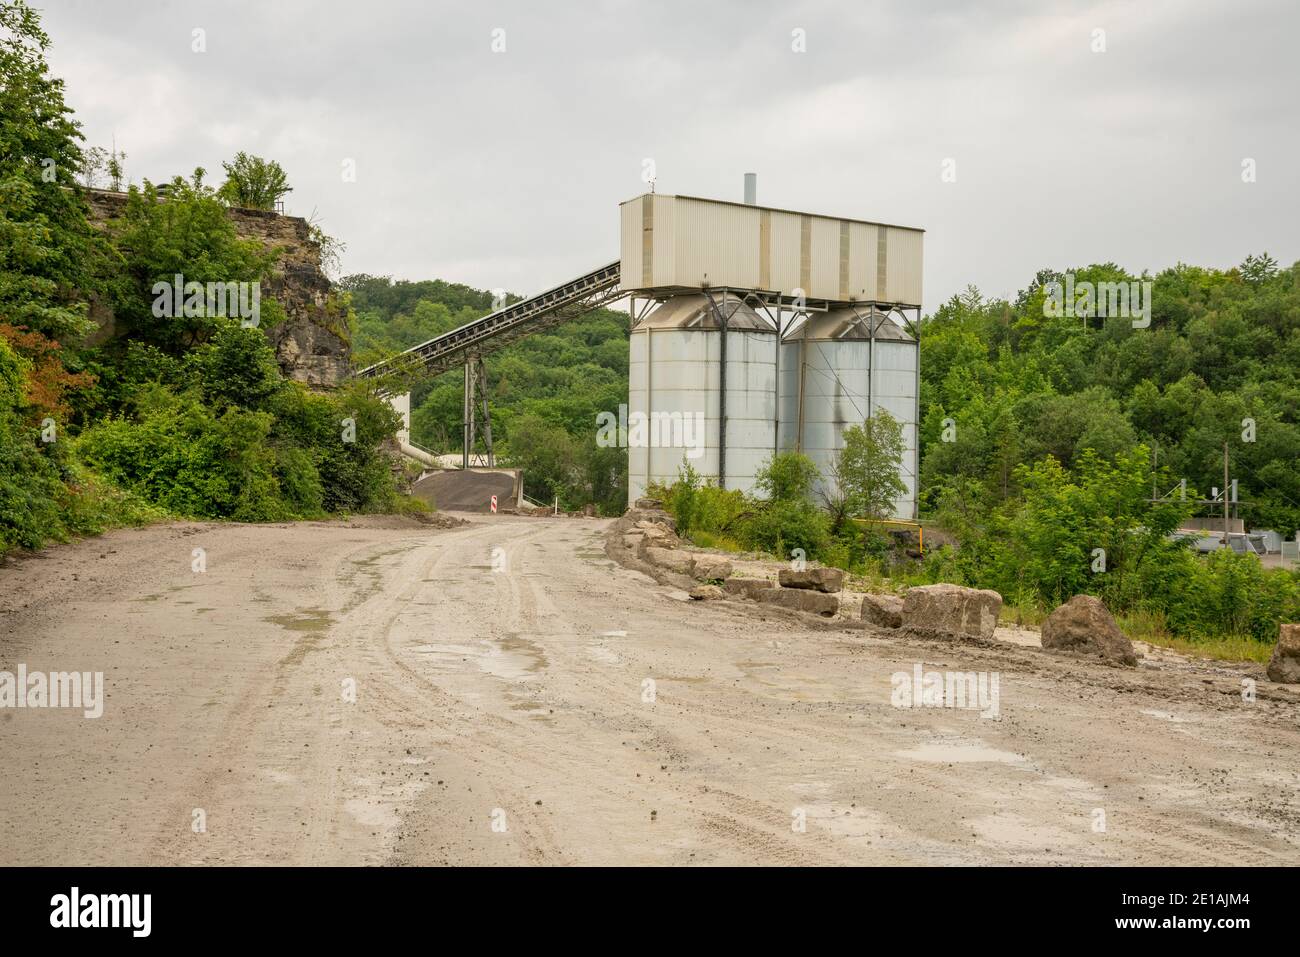 gravel mill scenery at summer time Stock Photo